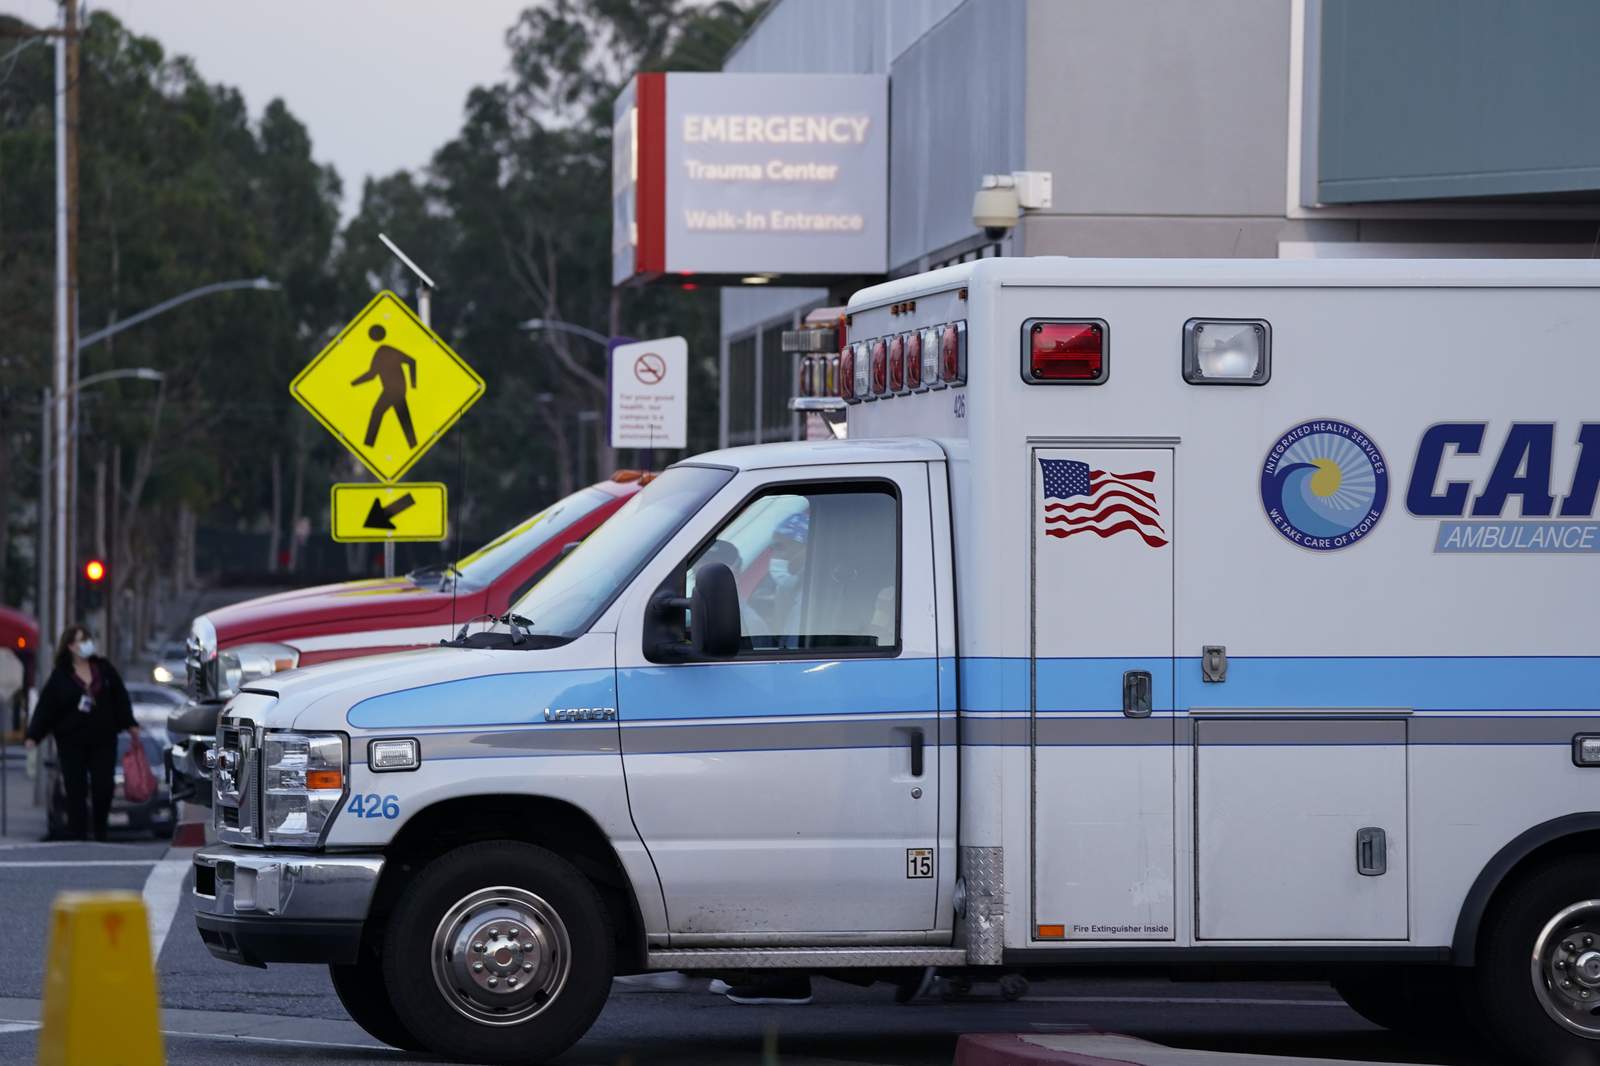 California hospital, in midst of COVID-19 crisis, maxes out